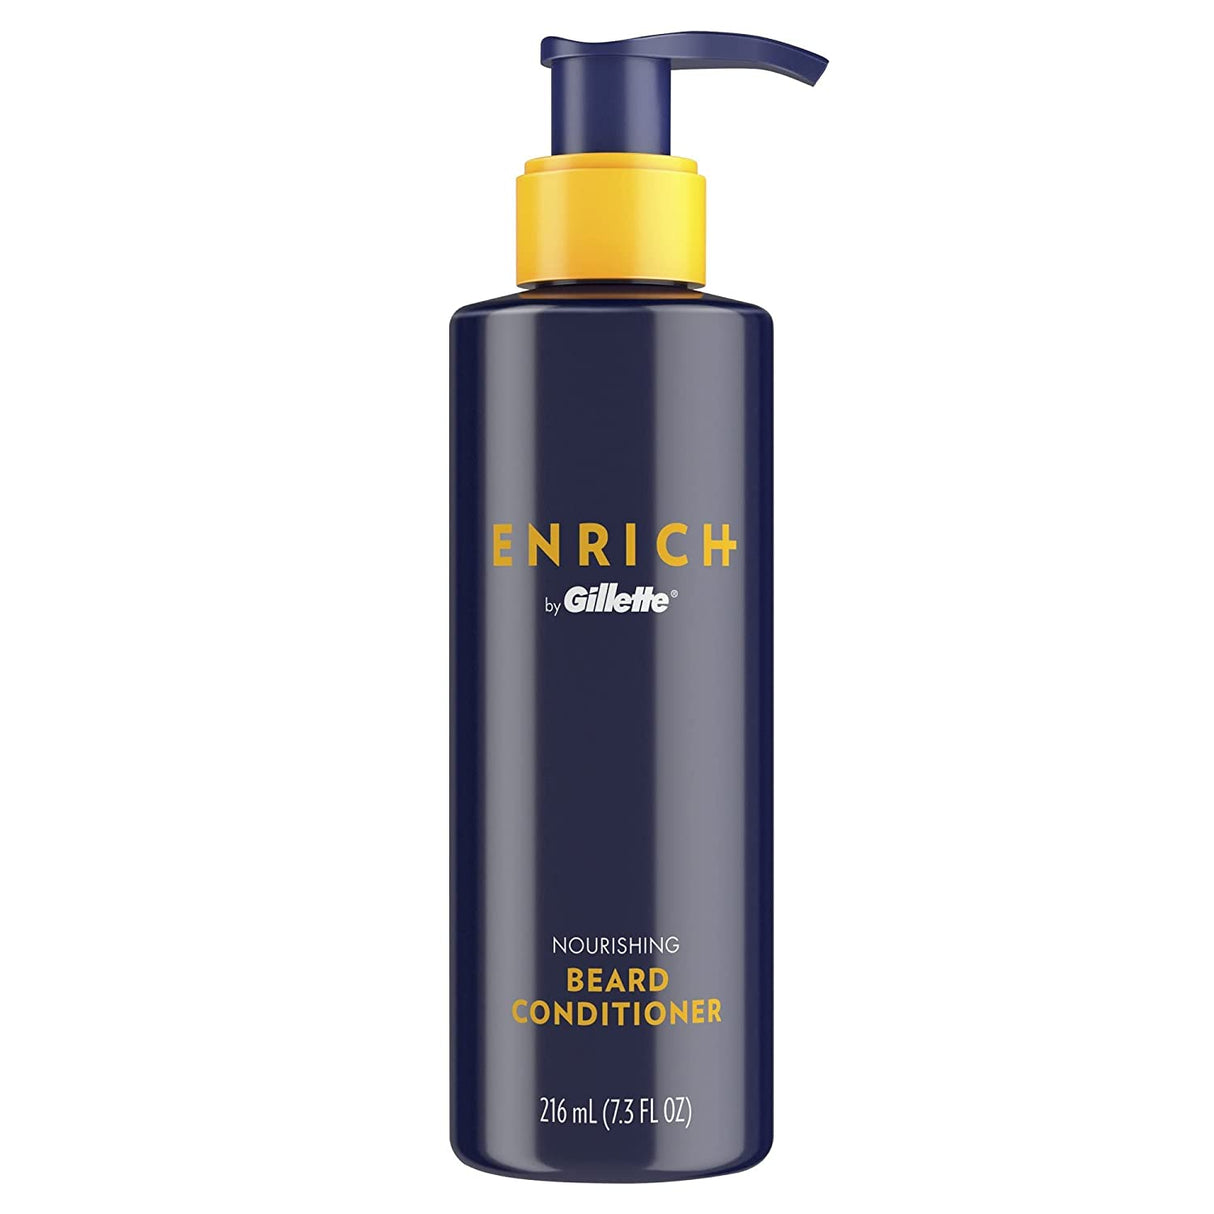 ENRICH NOURISHING BEARD CONDITIONER 7.3OZ GILLETTE Find Your New Look Today!